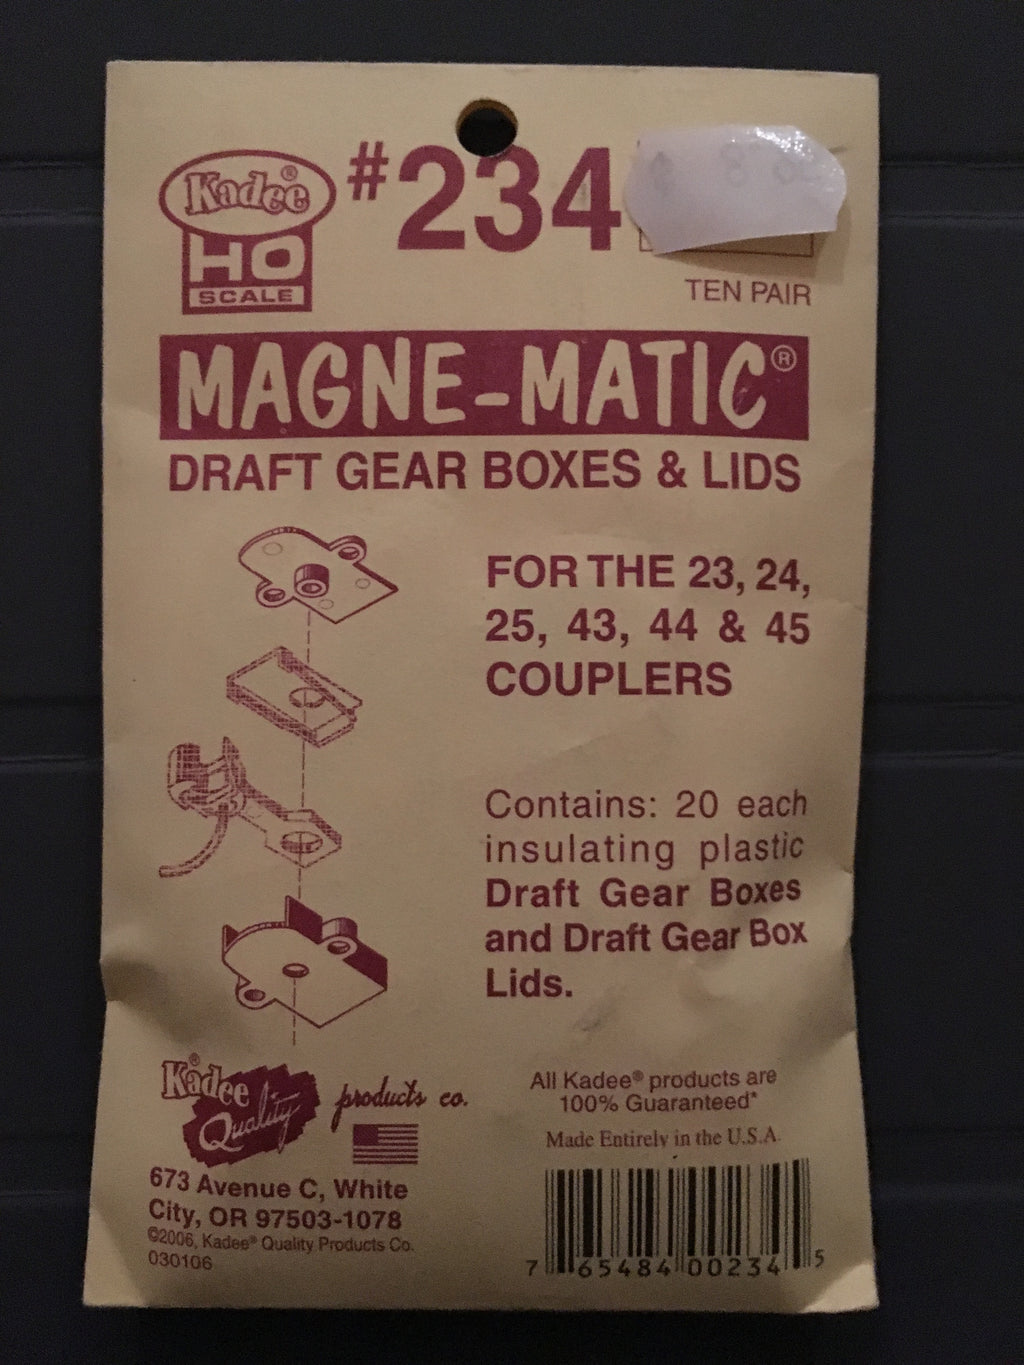 # 234 Draft Gear Boxes and Lids for23, 24, 25, 43, 44, 45 Coupl